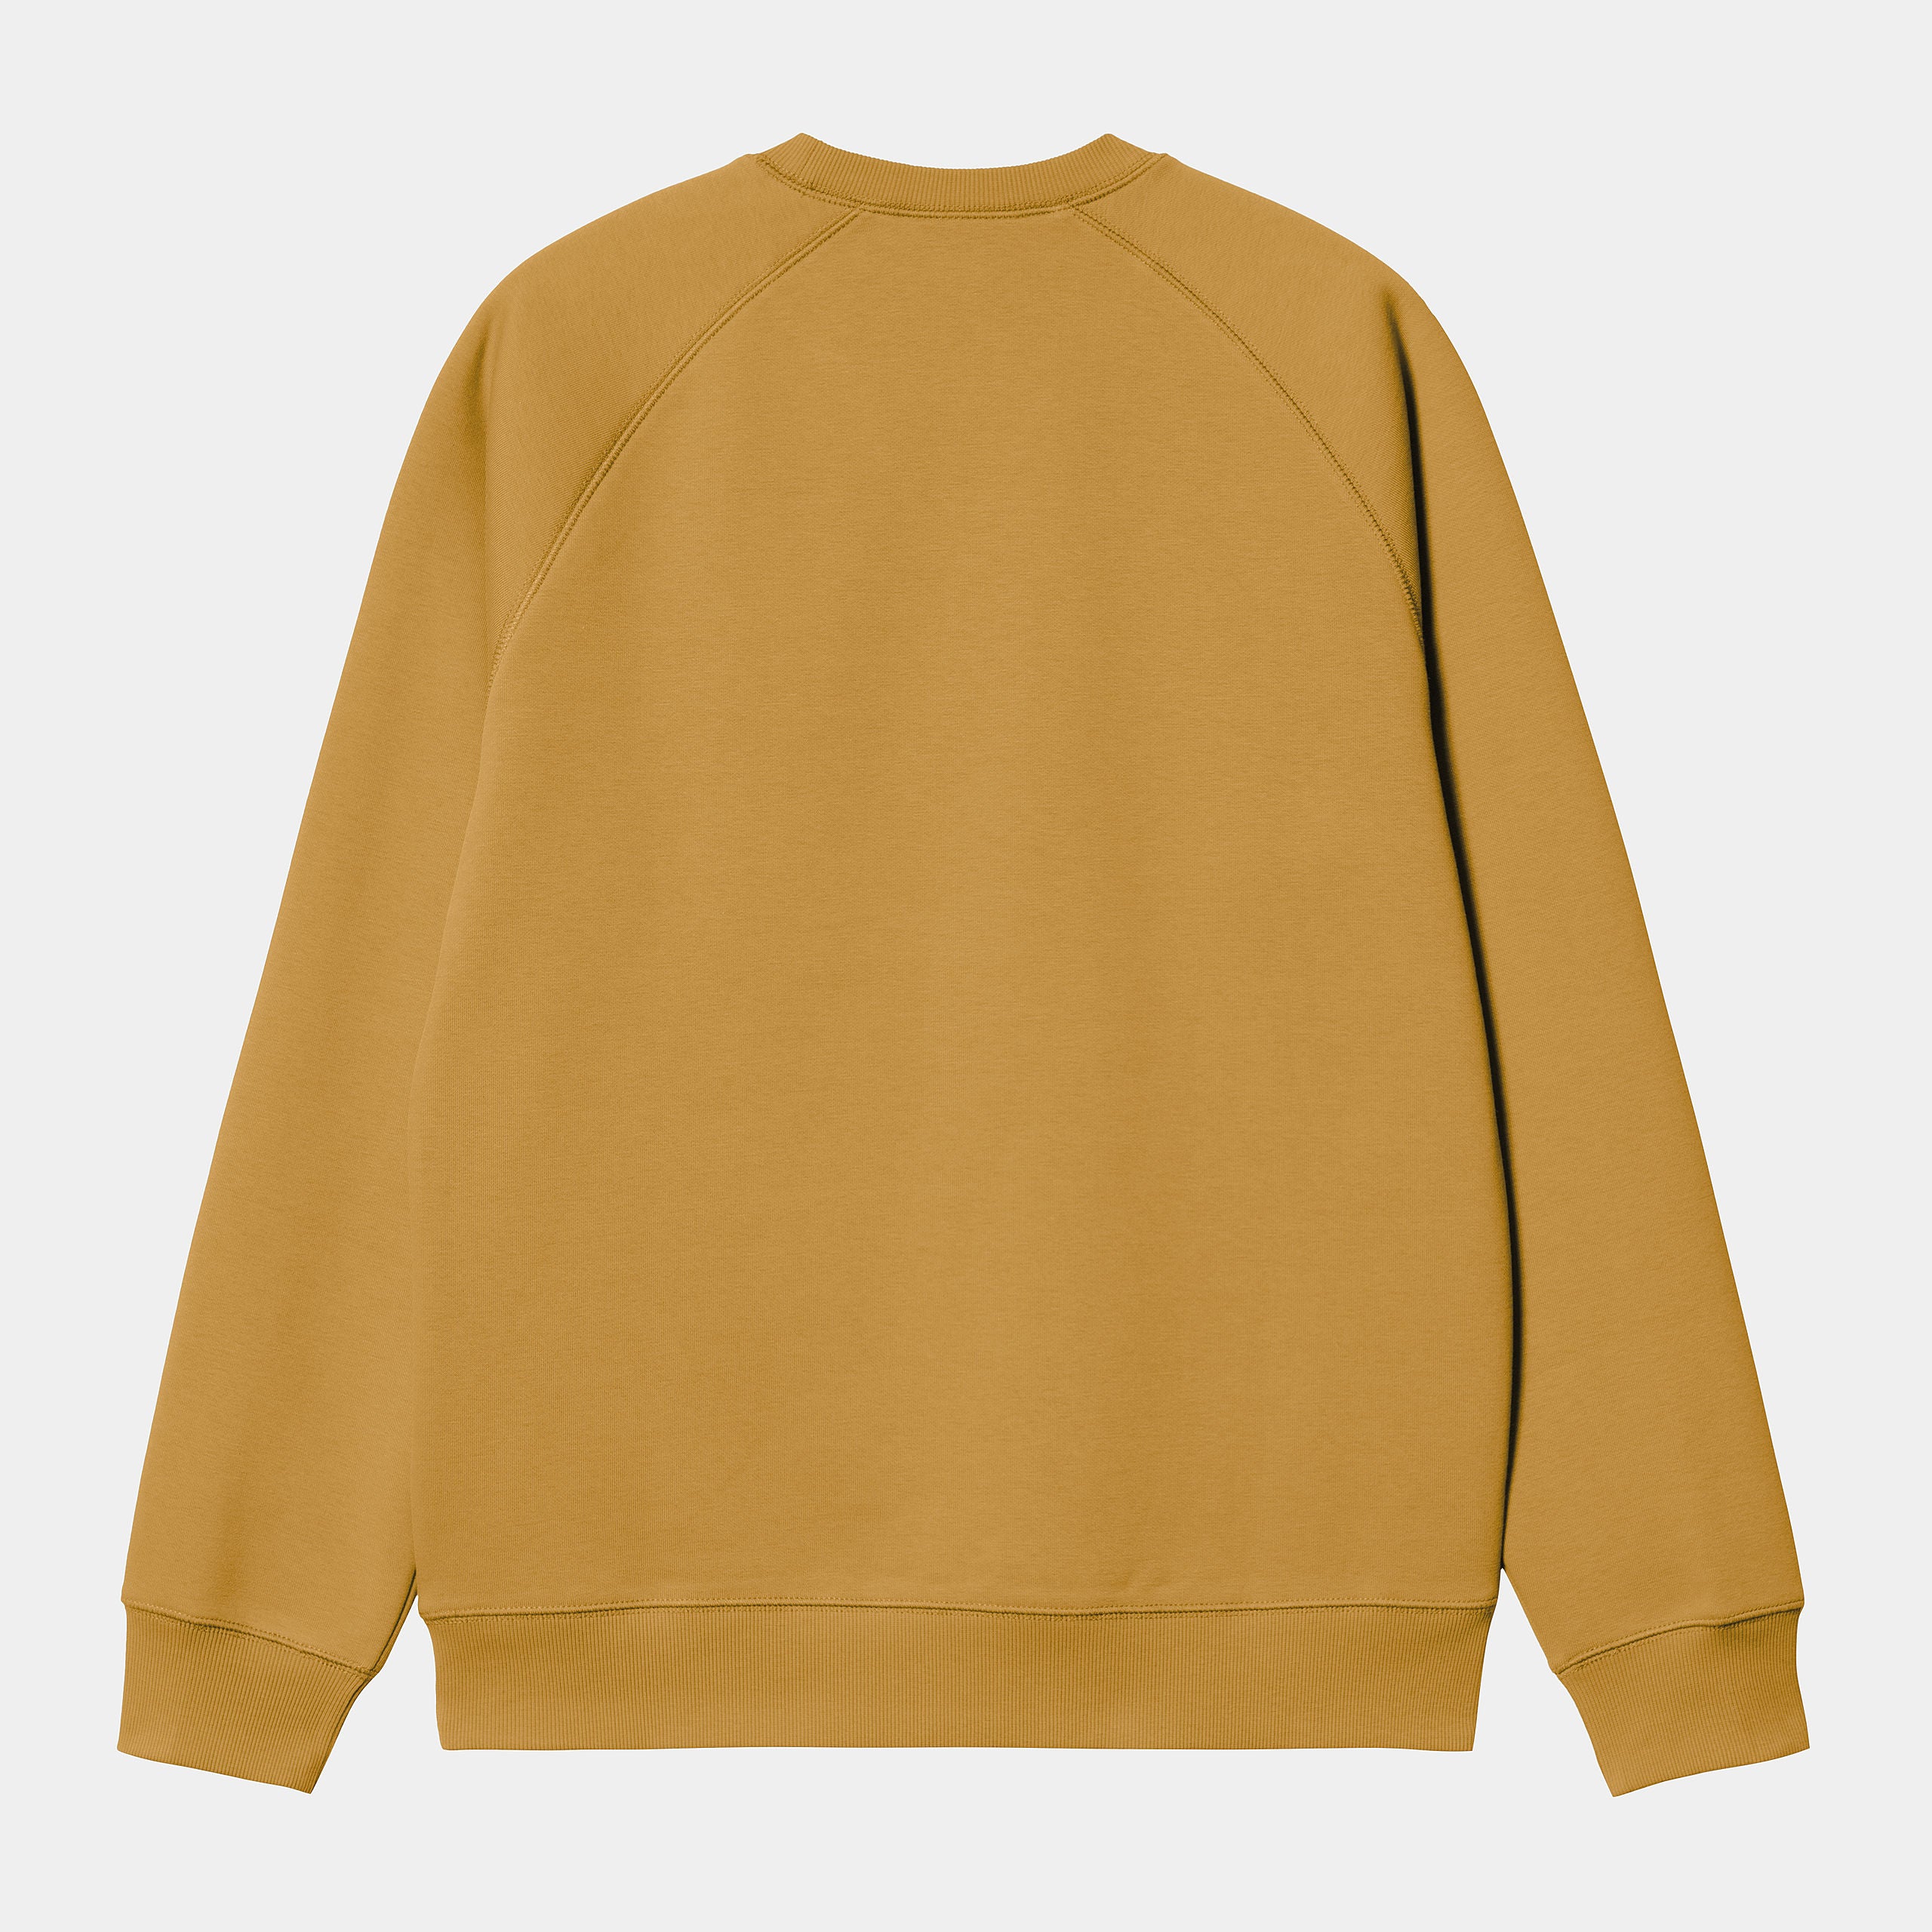 Carhartt WIP Mens Chase Sweat Top - Sunray / Gold